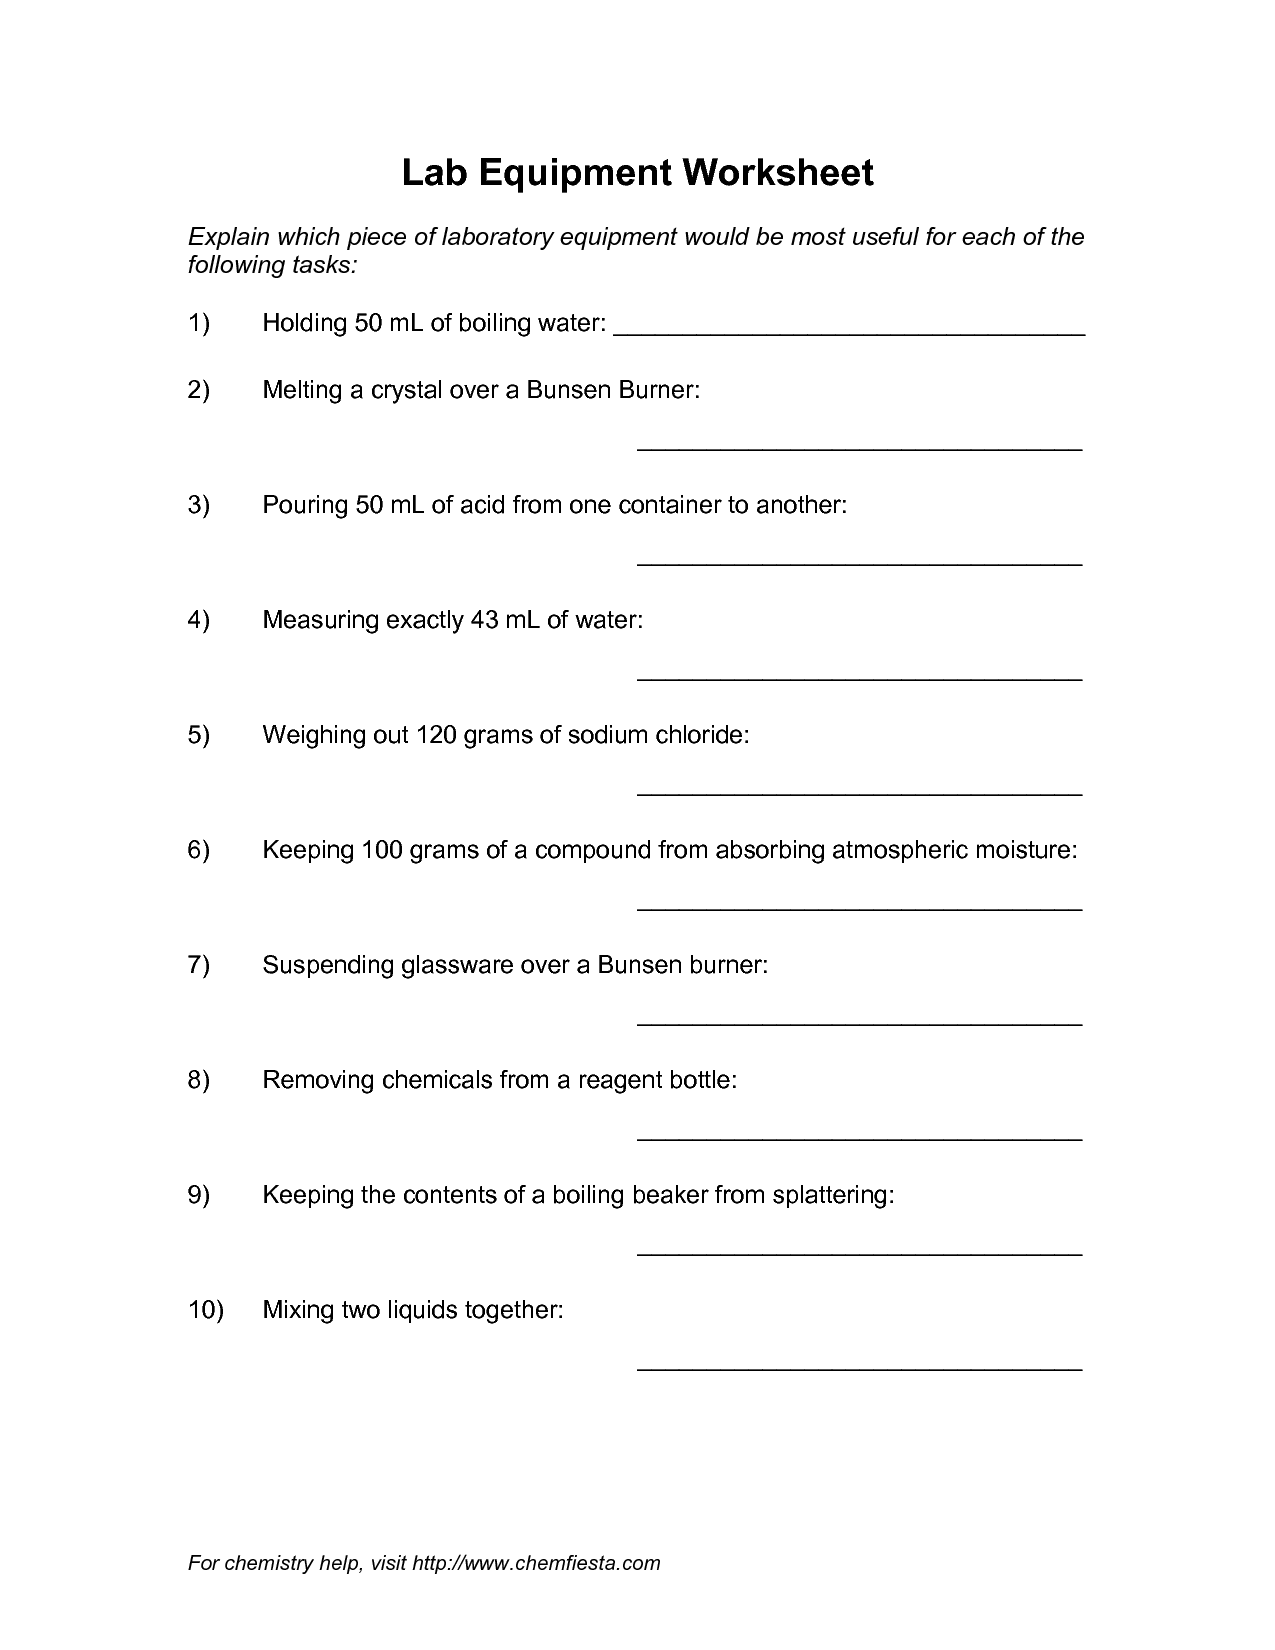 11 Best Images of Lab Equipment Worksheet Answers - Science Lab